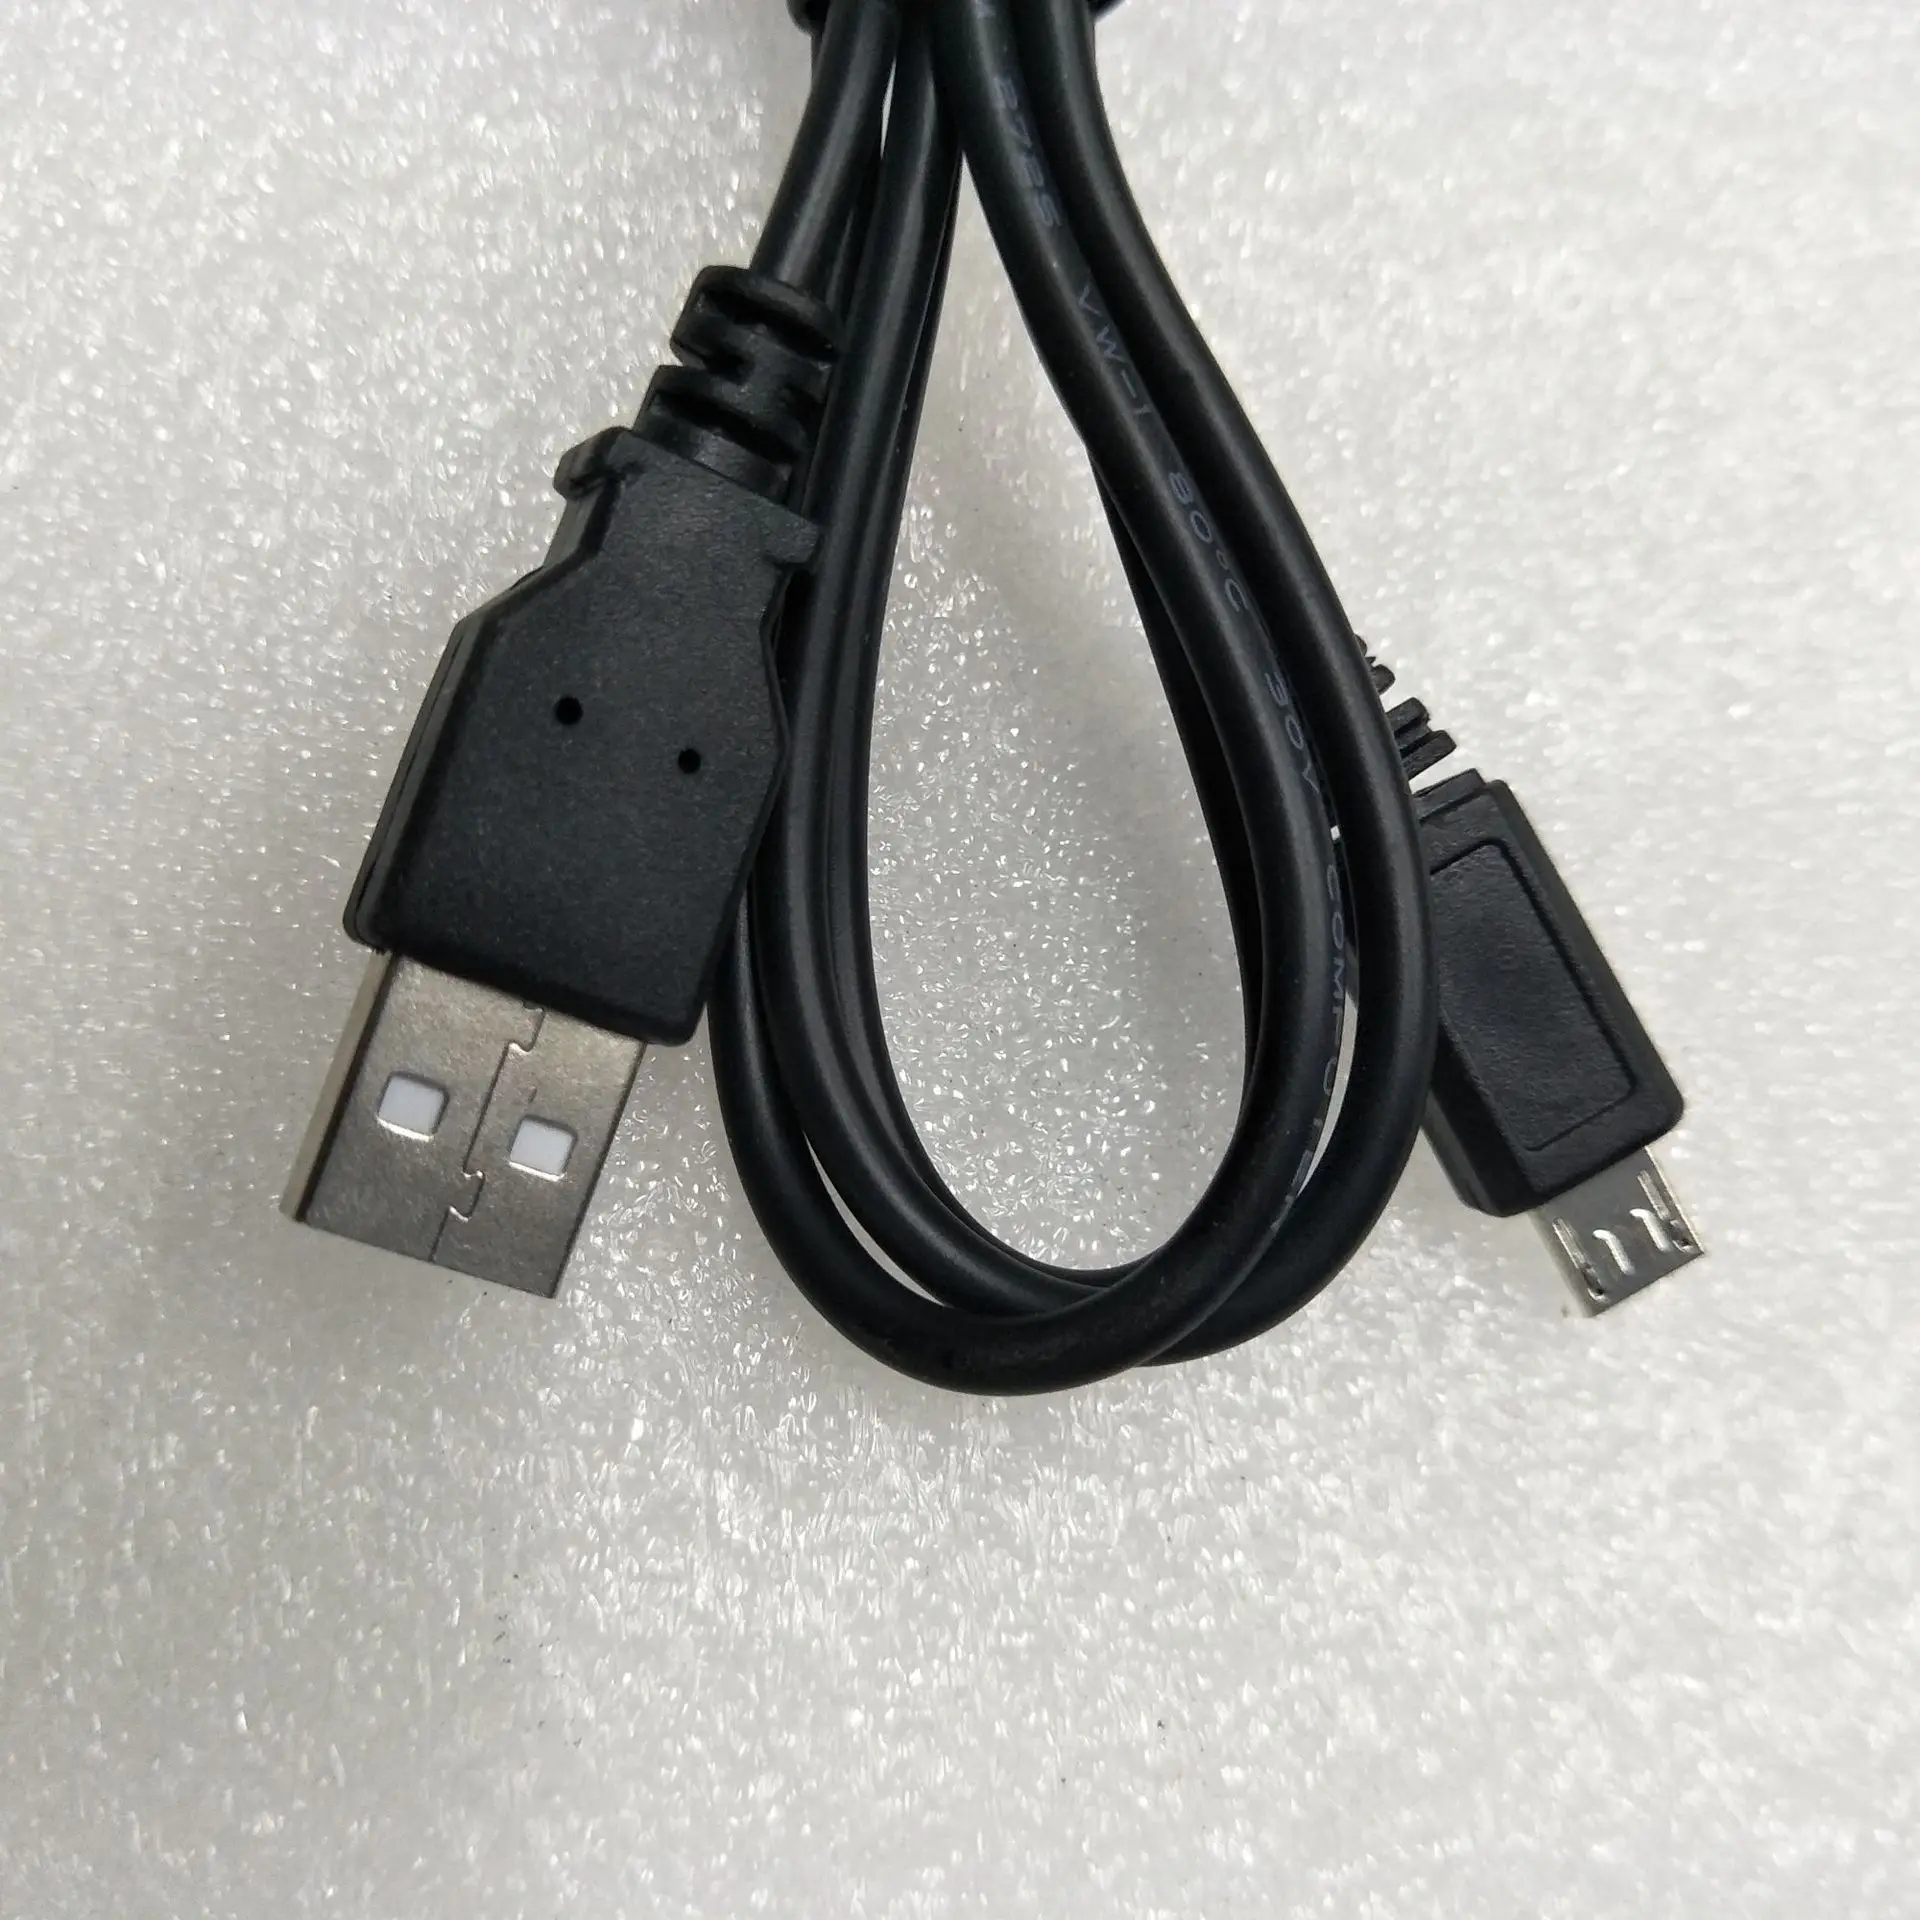 

Suitable for Nikon P600 P340 AW120S S6800 D3400 camera data cable UC-E20 / E21